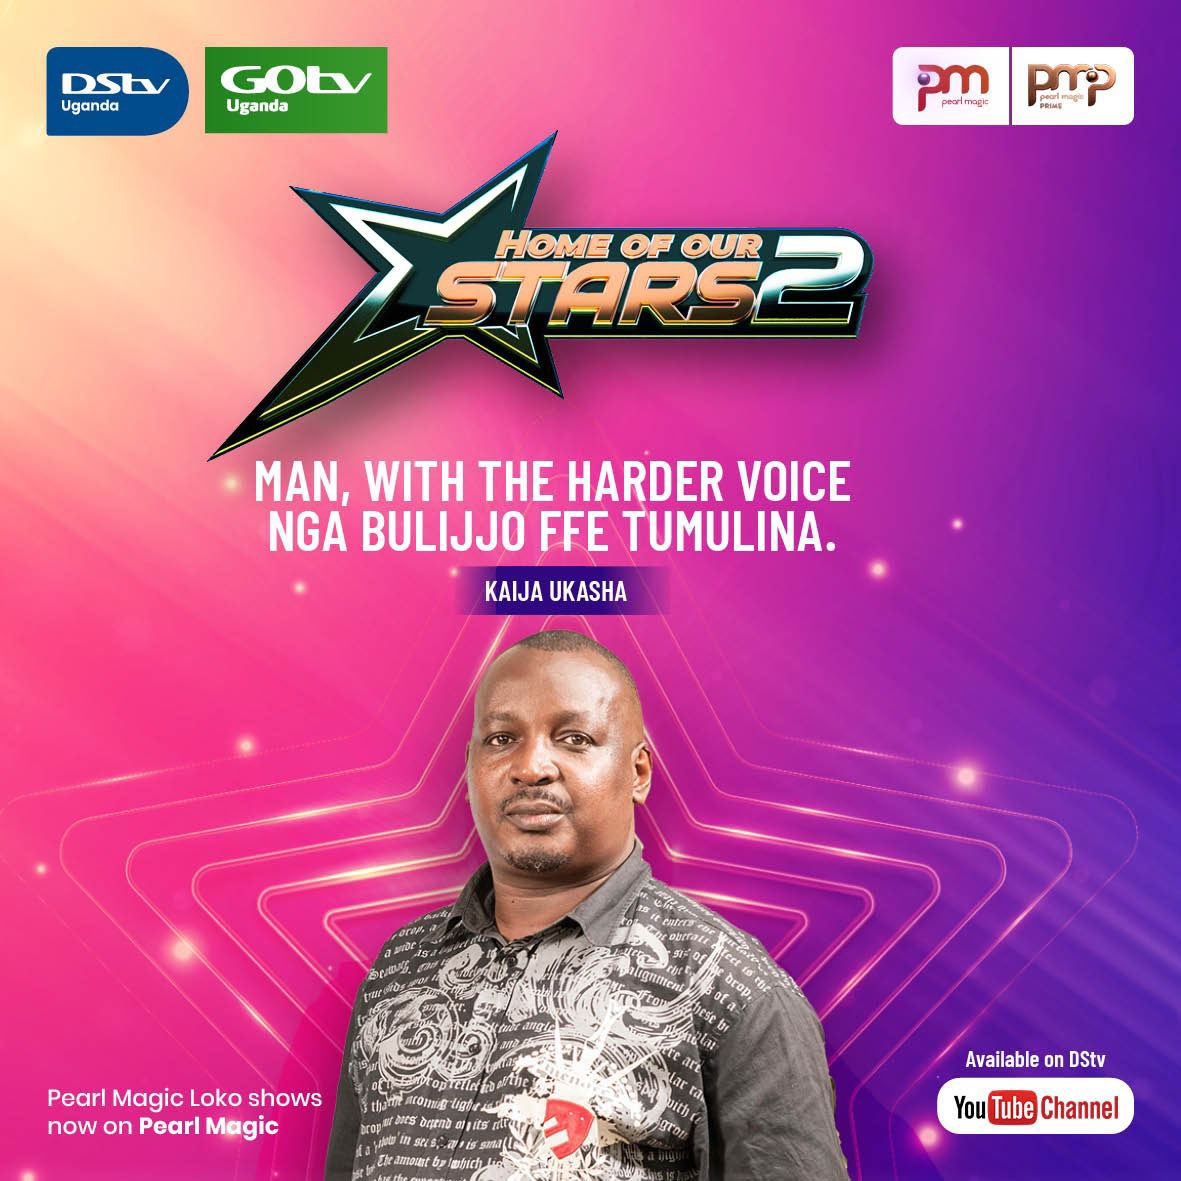 VJ Shaolin Khan is the voice behind the luganda translated dramas on Pearl Magic Loko which has now been merged with @PearlMagicTV. He’ll be joining @Mizzflav on #HomeOfOurStars. Catch their chat on @DStv’s YT Channel via youtu.be/7MMnk1FIG_g tomorrow 10am. #ItsYourMoment